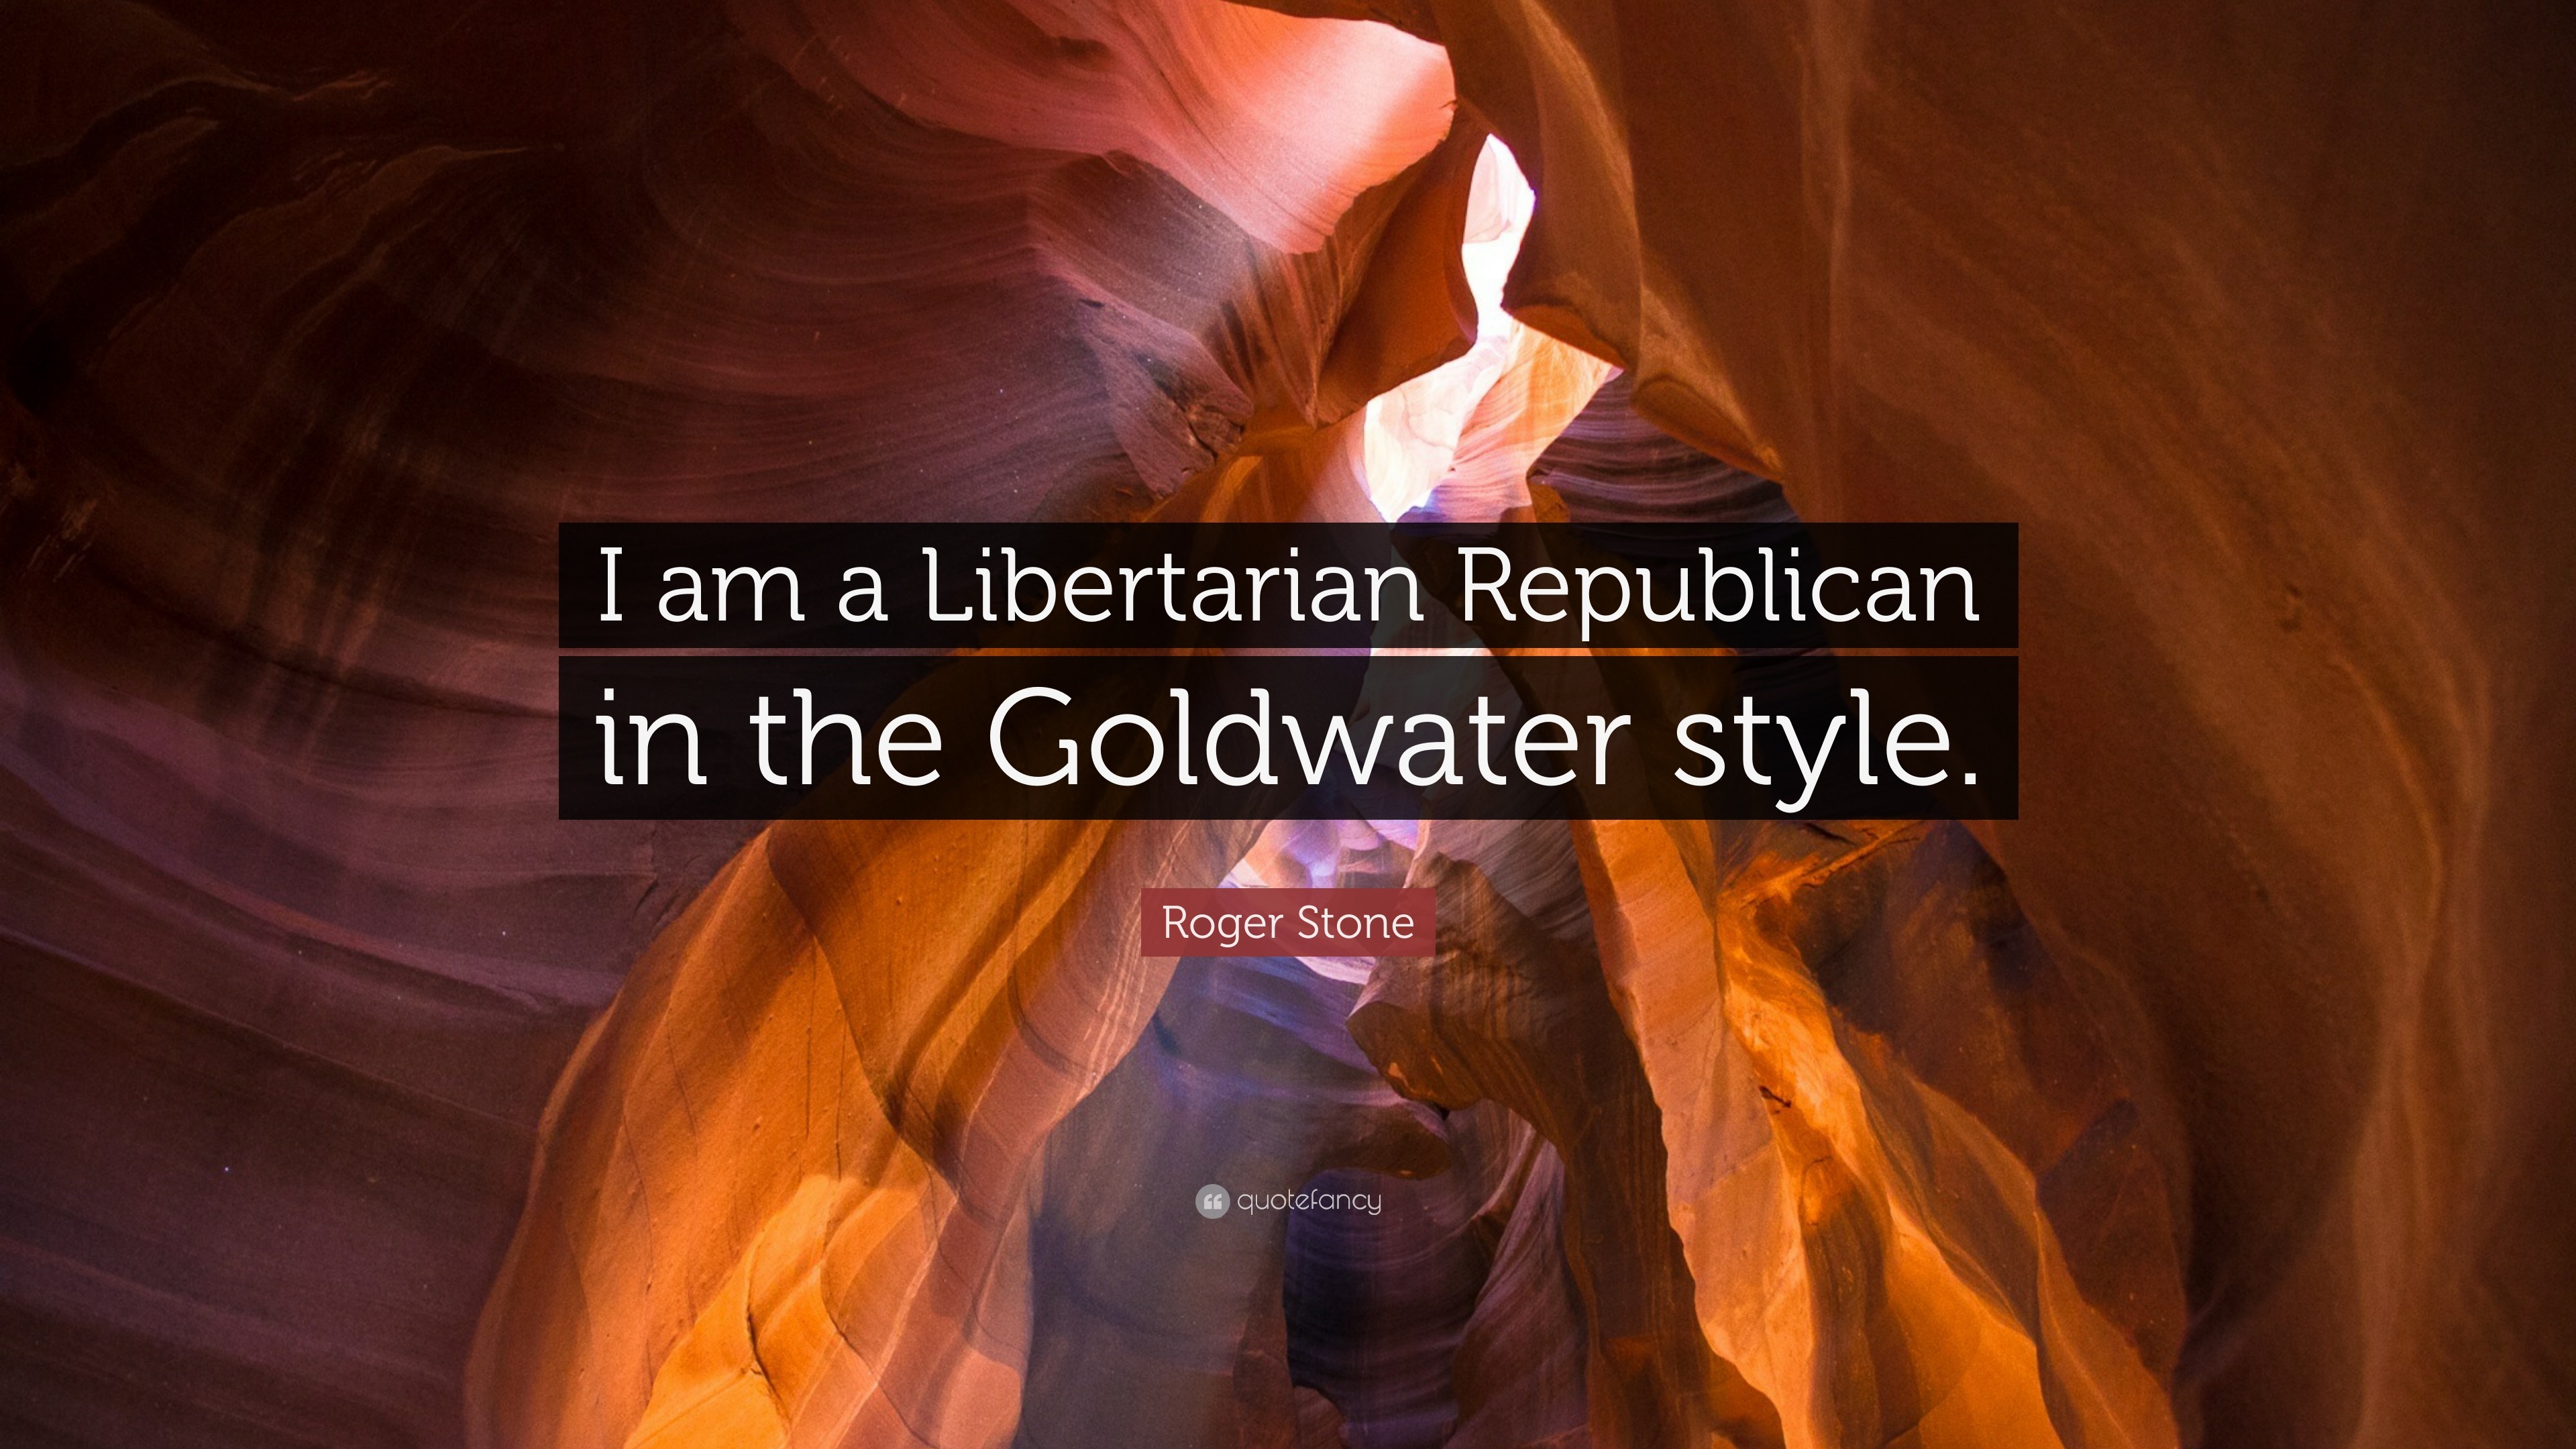 3840x2160 Roger Stone Quote: “I am a Libertarian Republican in the Goldwater style.”